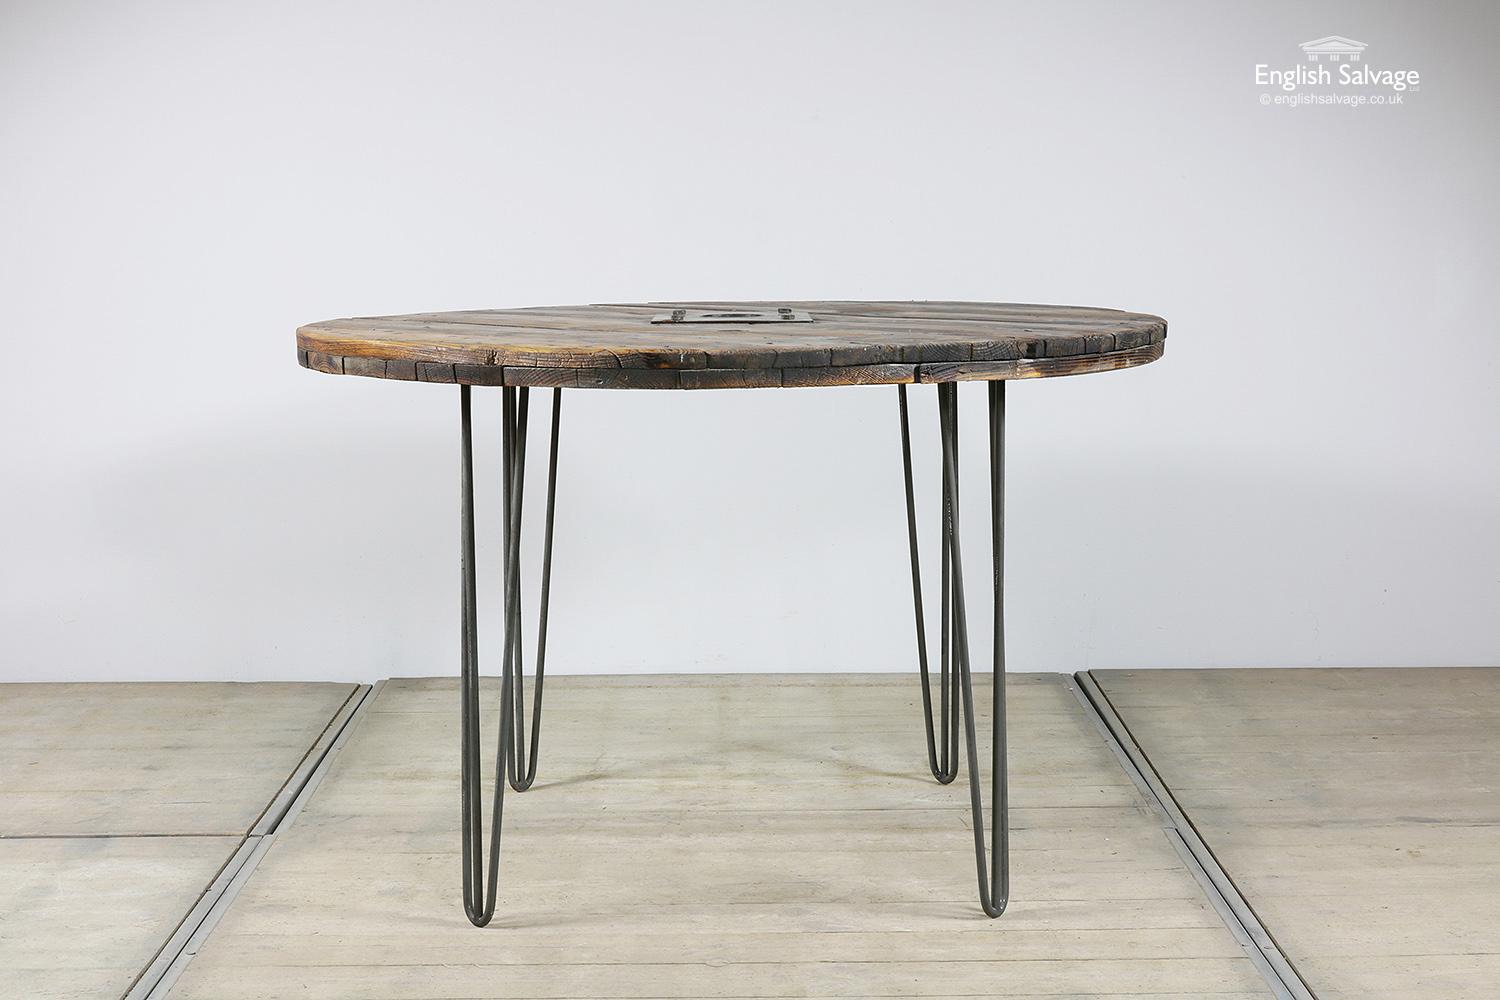 Reclaimed large vintage pine spool which has been repurposed into a circular table top with Mid Century metal legs. Splits, old nails and dings in the table top, as expected with past use.